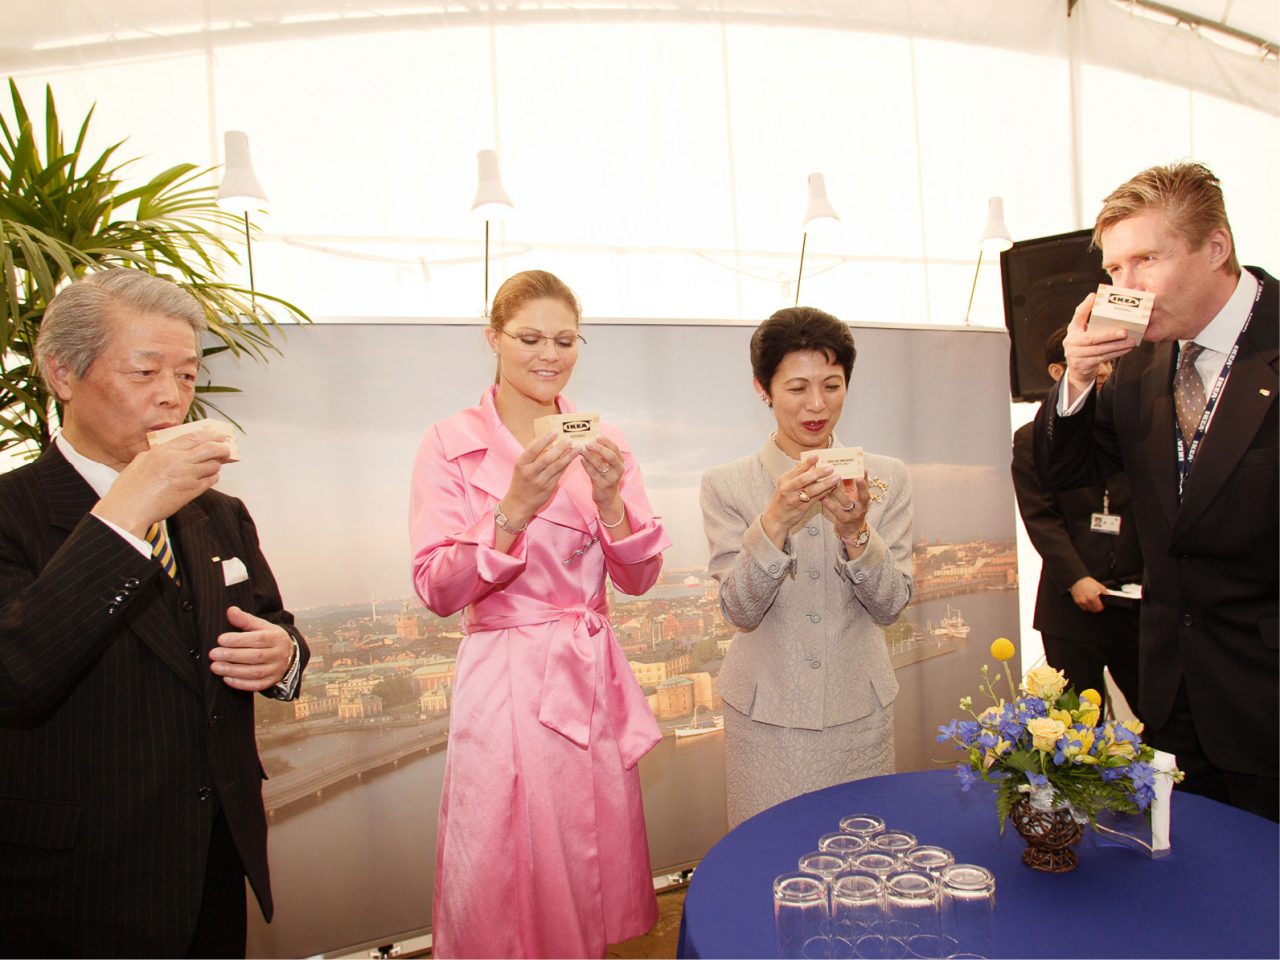 Four well-dressed people, two men in dark suits, woman in pink suit, woman in grey suit drinking from wooden bowls.